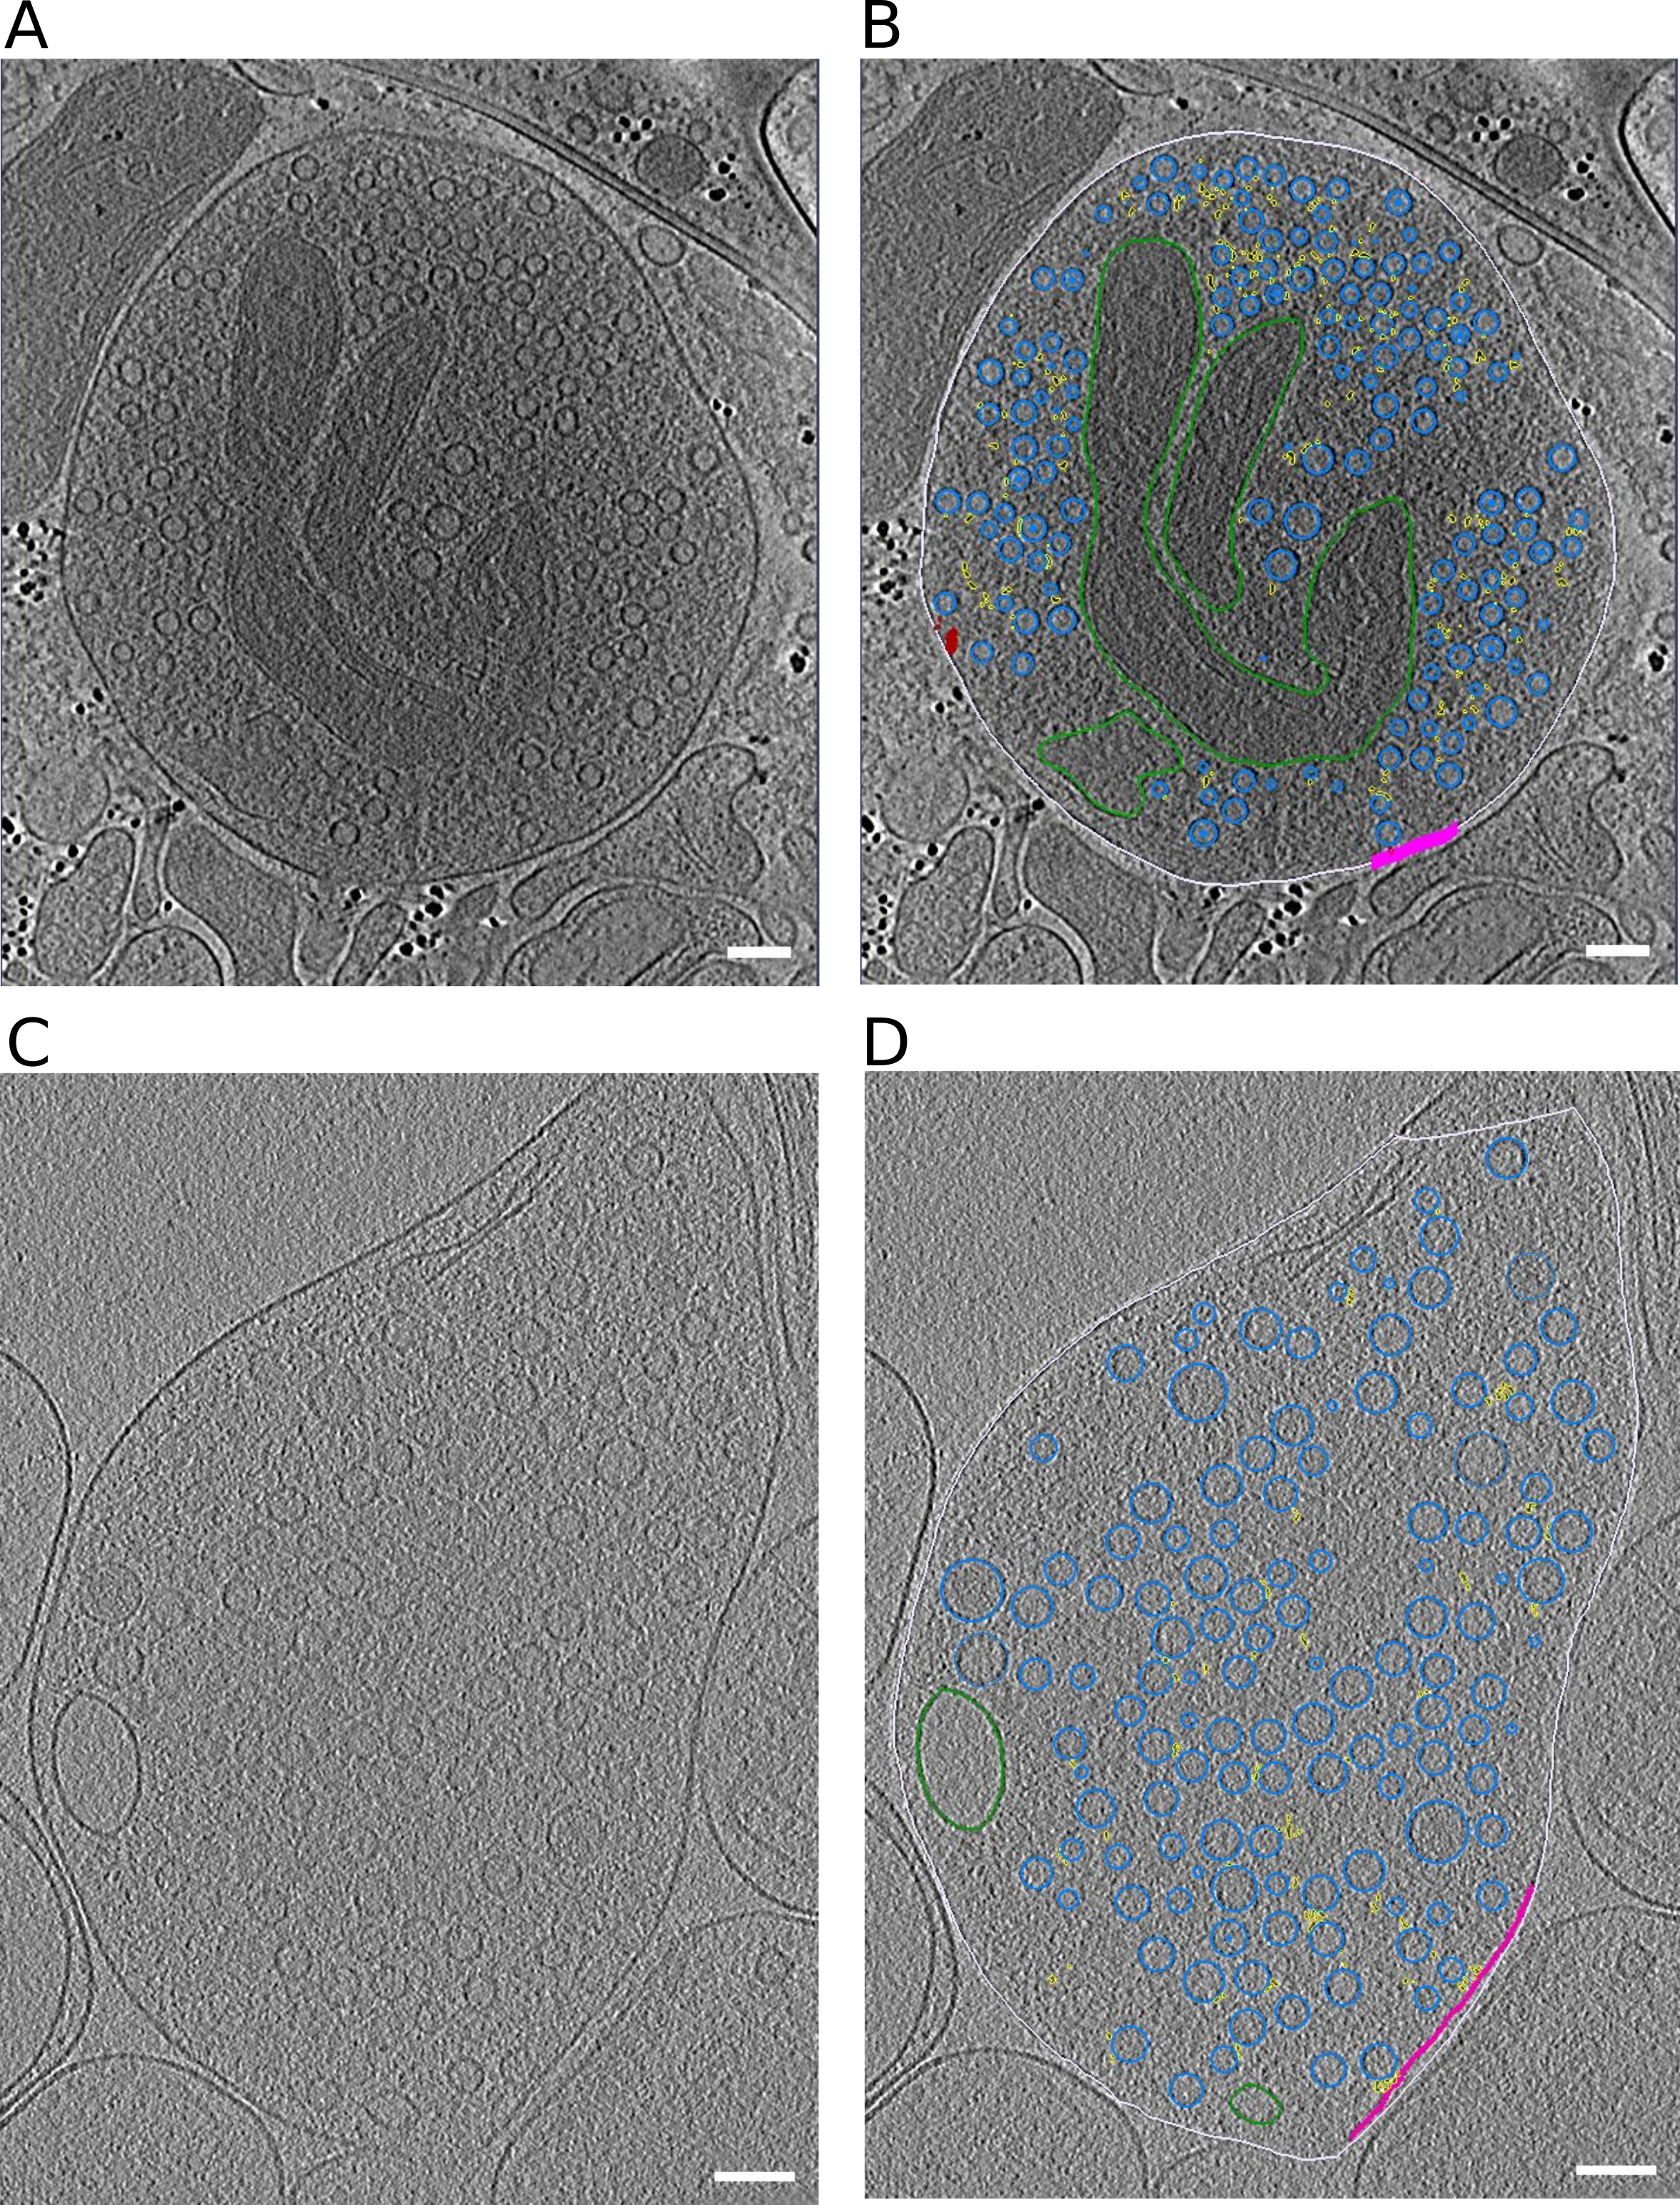 Figure EV1: Representative slices through tomograms. (A, B) Tomographic slice without (A) and with (B) segmentation of synaptosome with late fusion events. (C,D) Tomographic slice without (C) and with (D) segmentation of WT SNAP-25 neurons. Data information: segmentation colors: off-white = cell outline; pink = active zone; blue = synaptic vesicles; green = mitochondria; yellow = connectors, red = tethers. Scale bar, 100 nm.